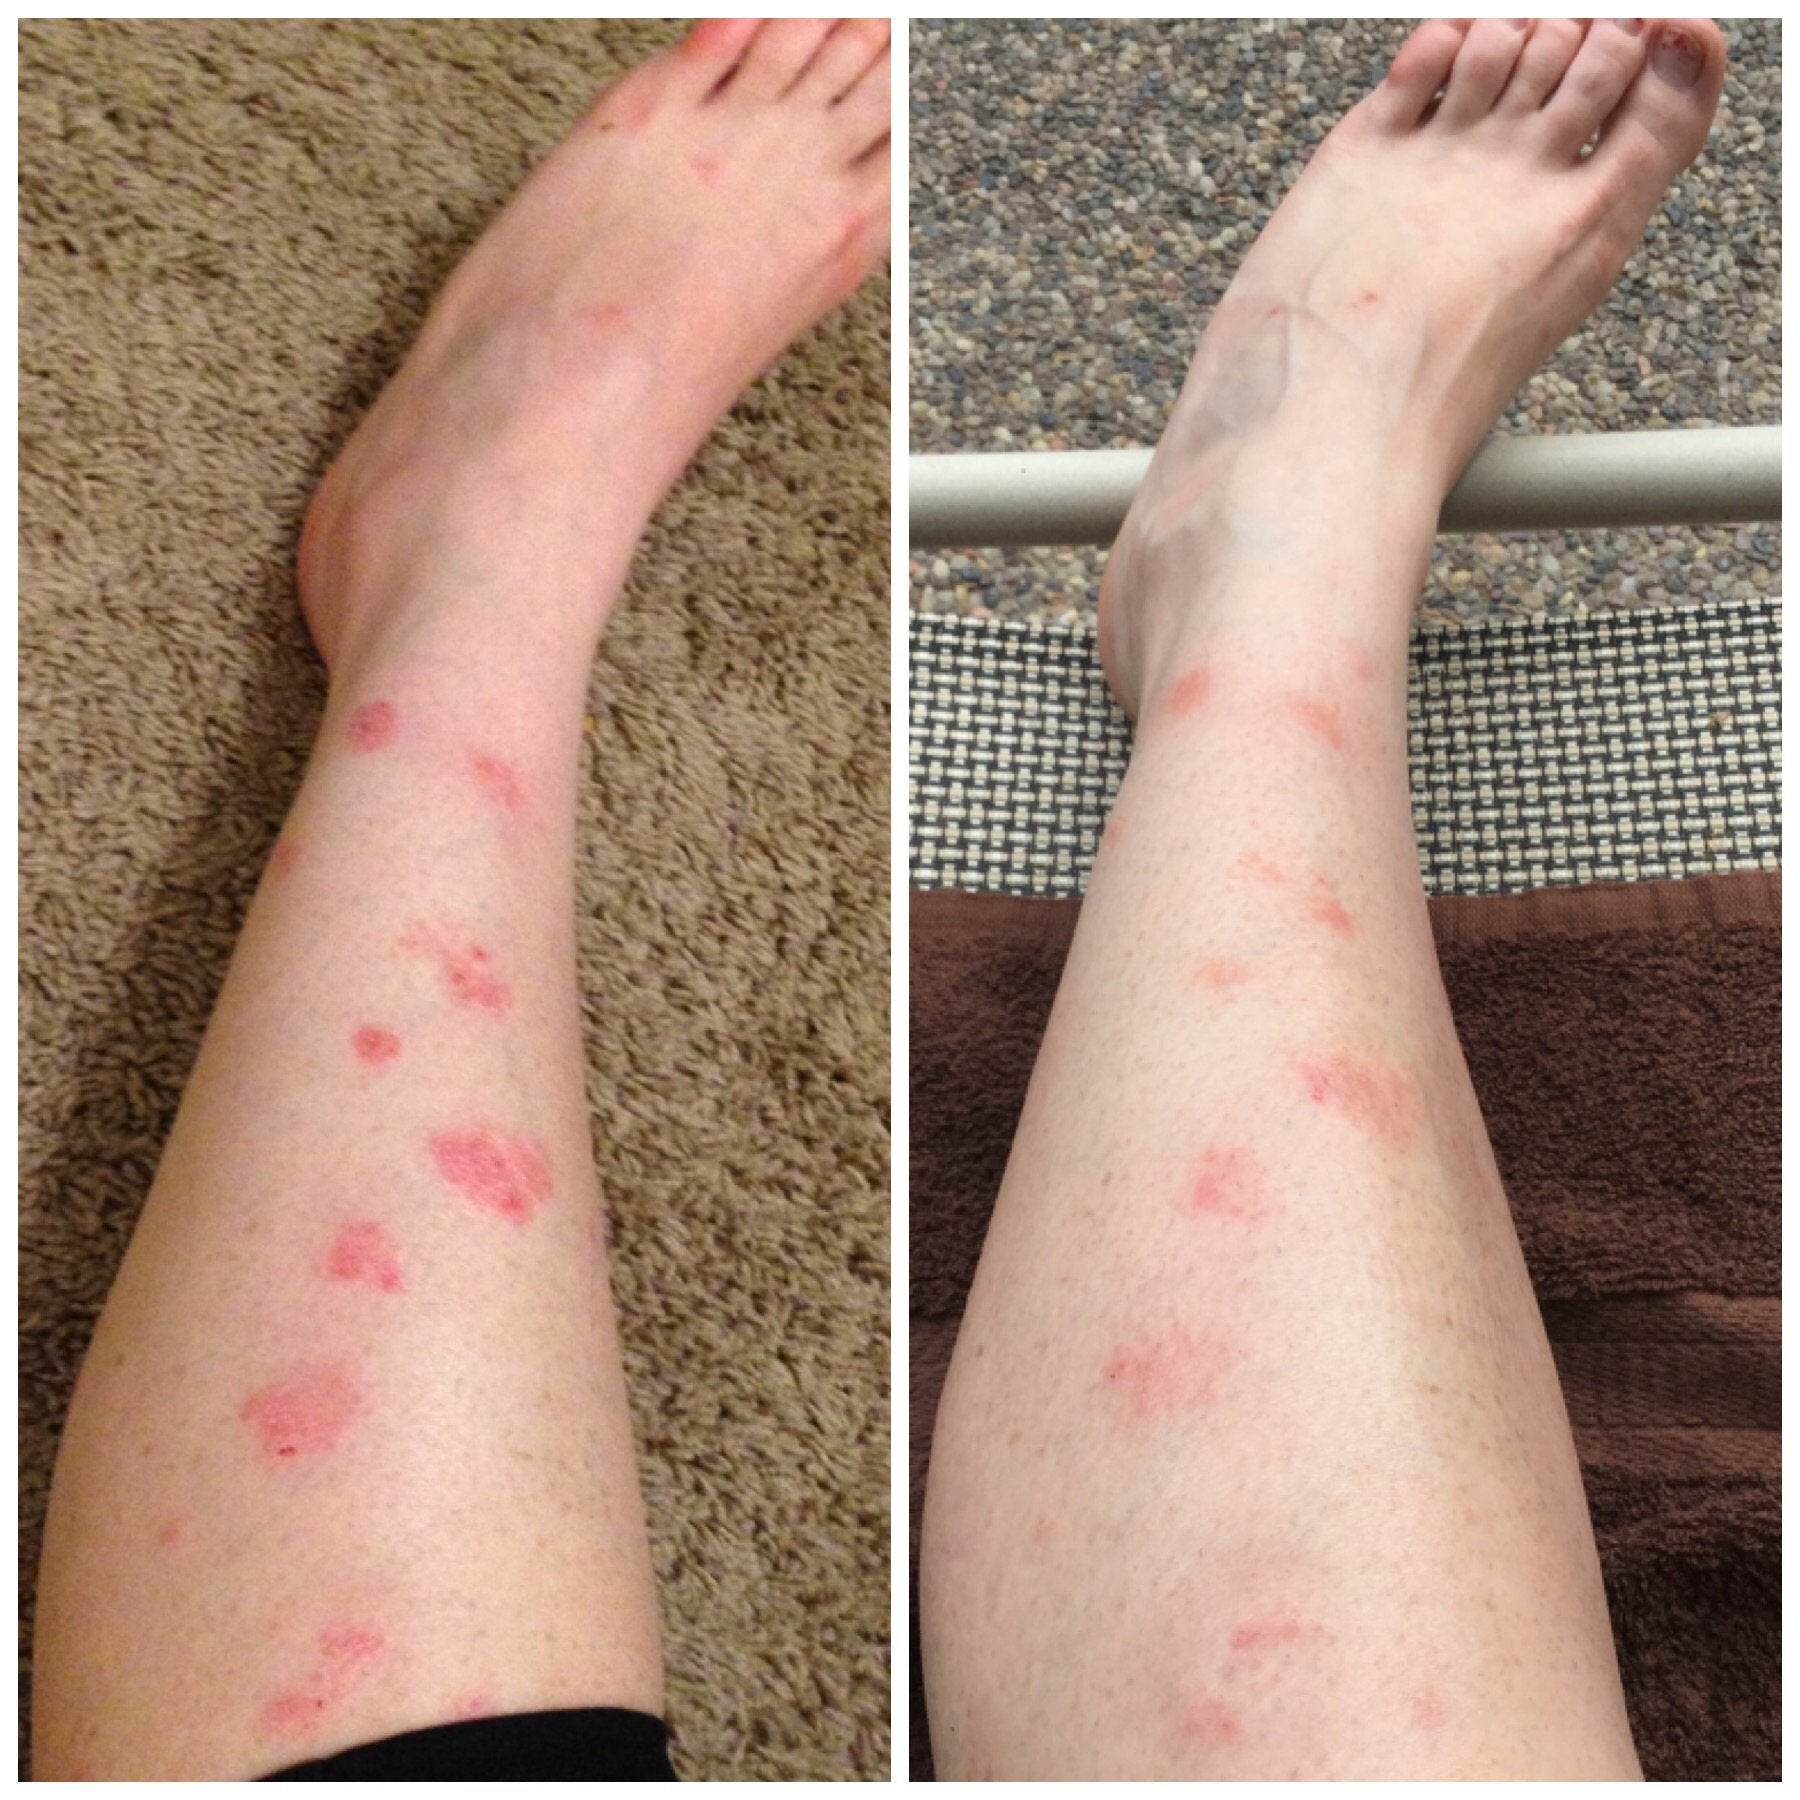 Results after one week on Humira : Psoriasis